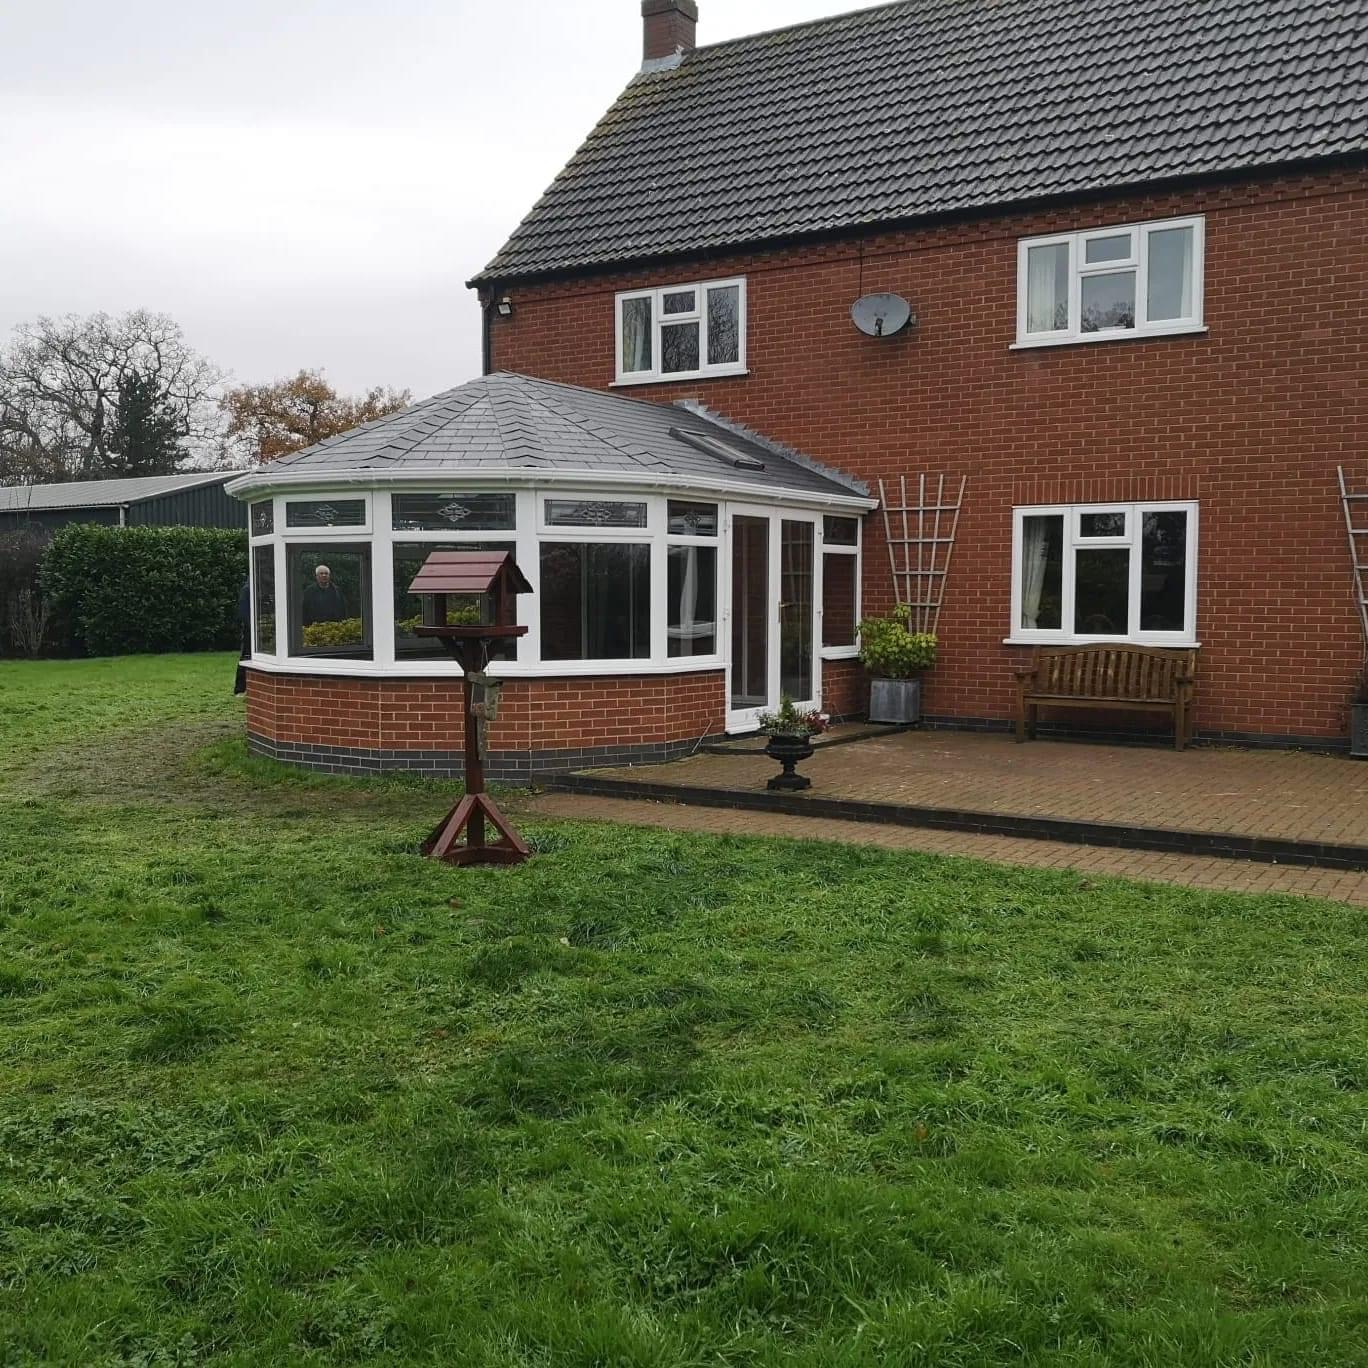 Wide view of tiled conservatory and house with garden.